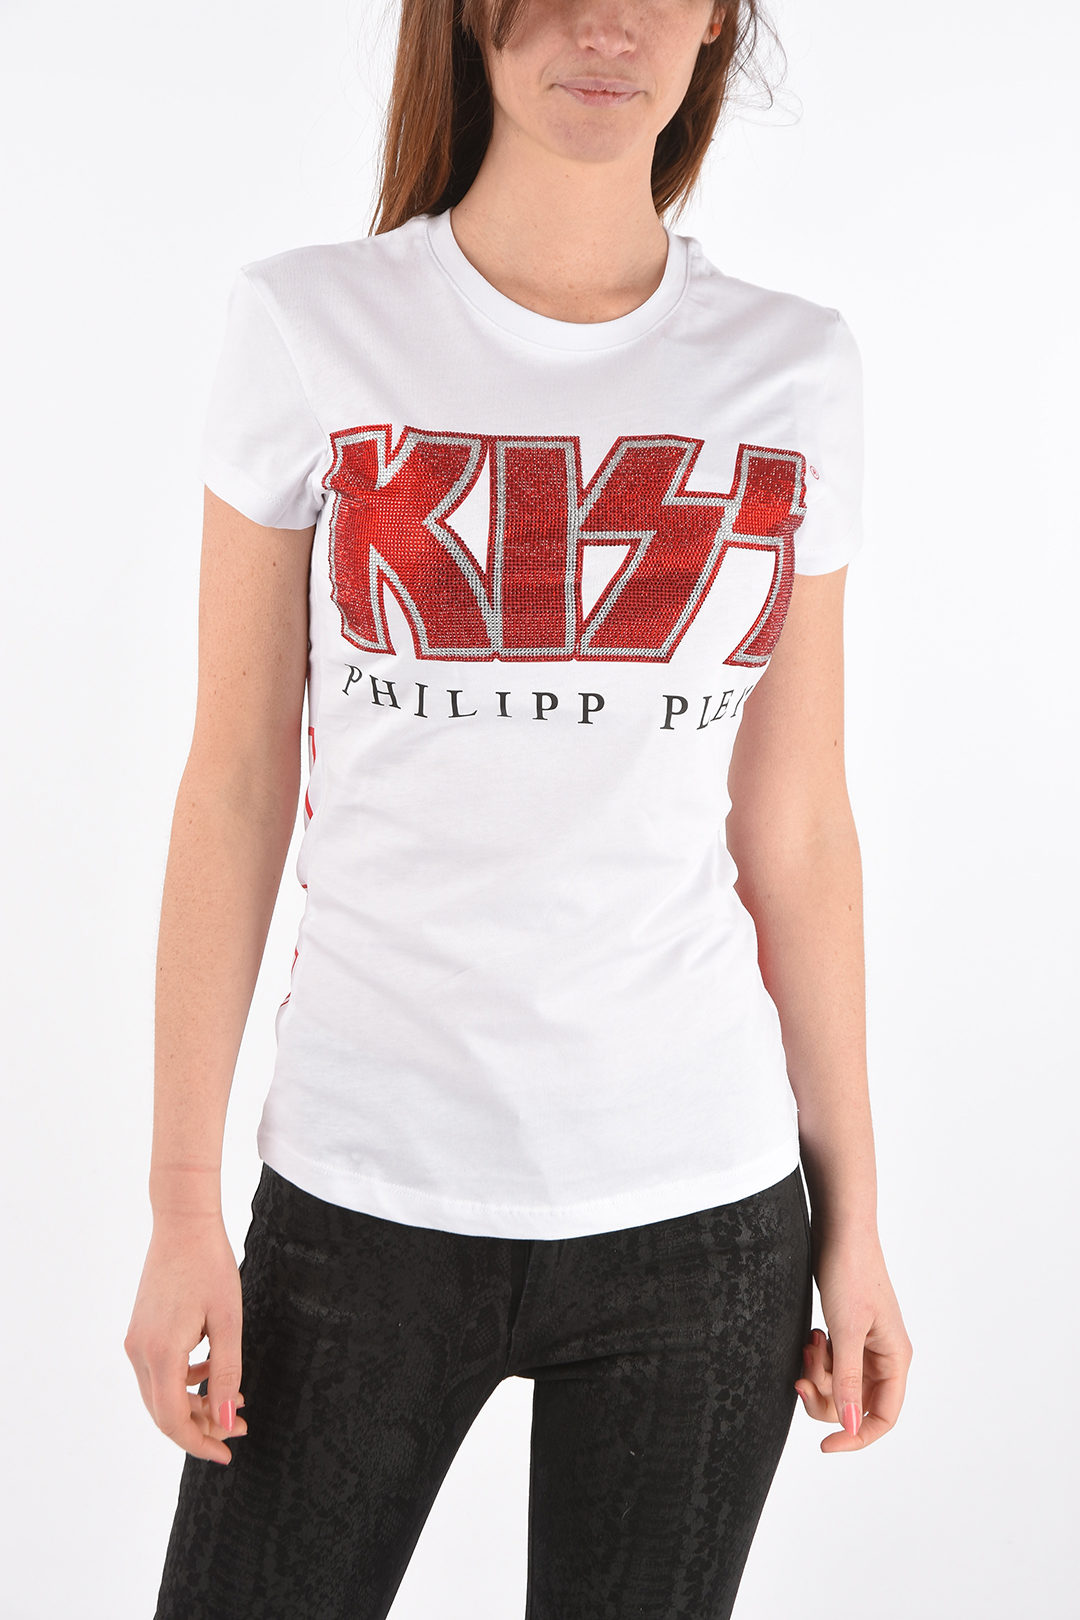 Welsprekend Picasso lijden Philipp Plein COUTURE KISS crew-neck t-shirt with with Rhinestone  Embellishment on the front women - Glamood Outlet